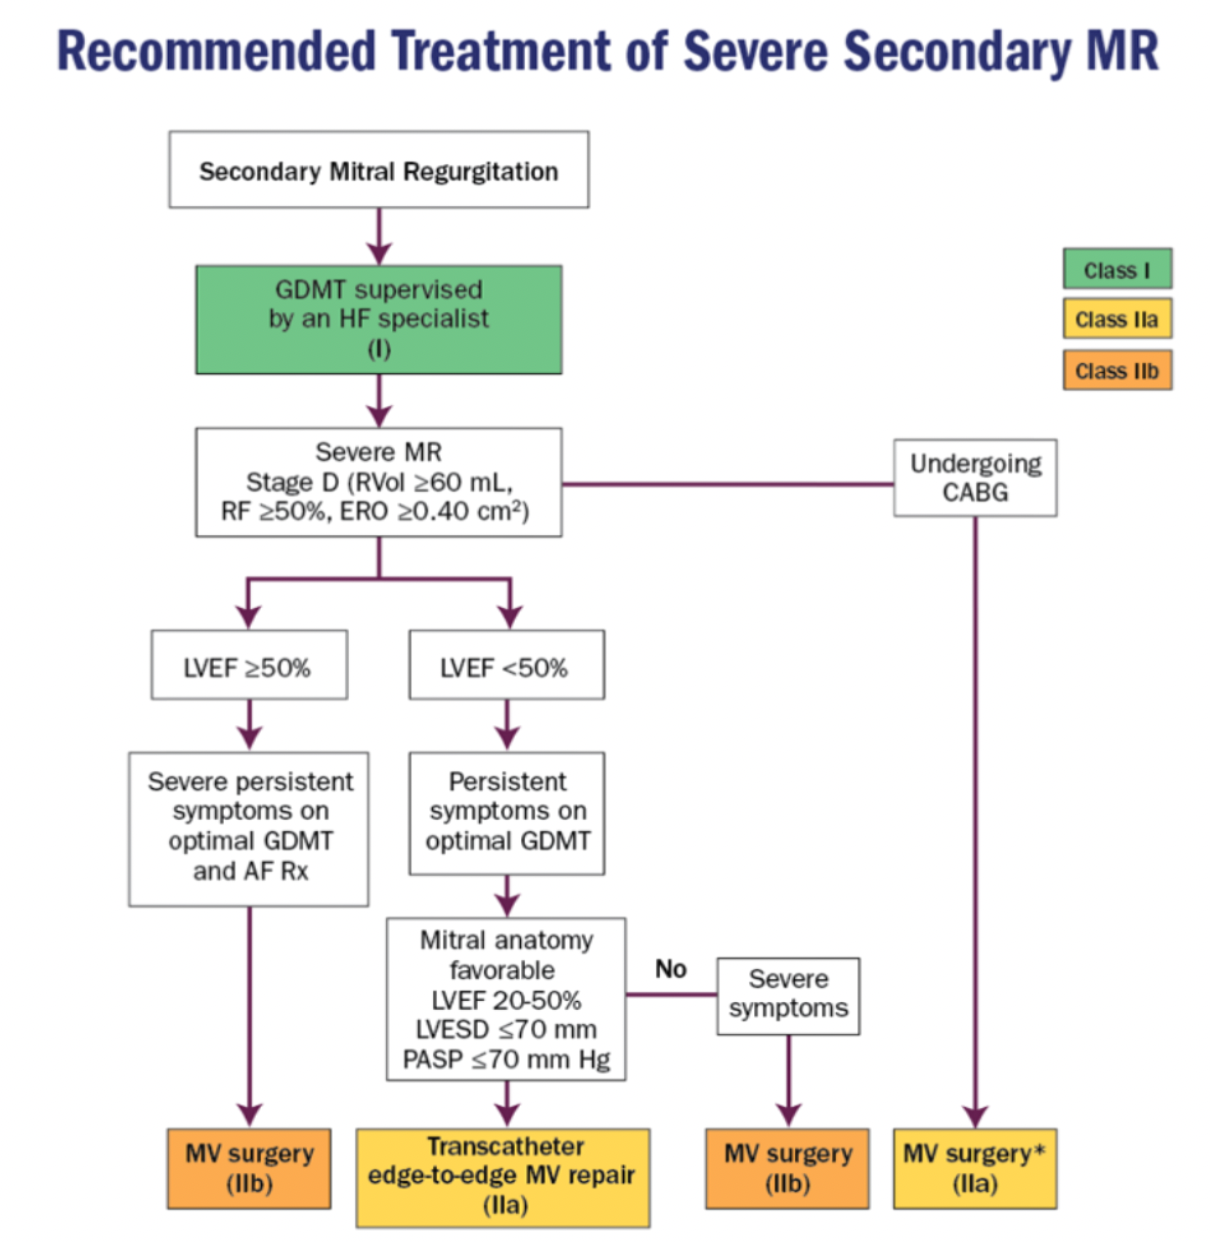 Recommended Treatment of severe secondary MR